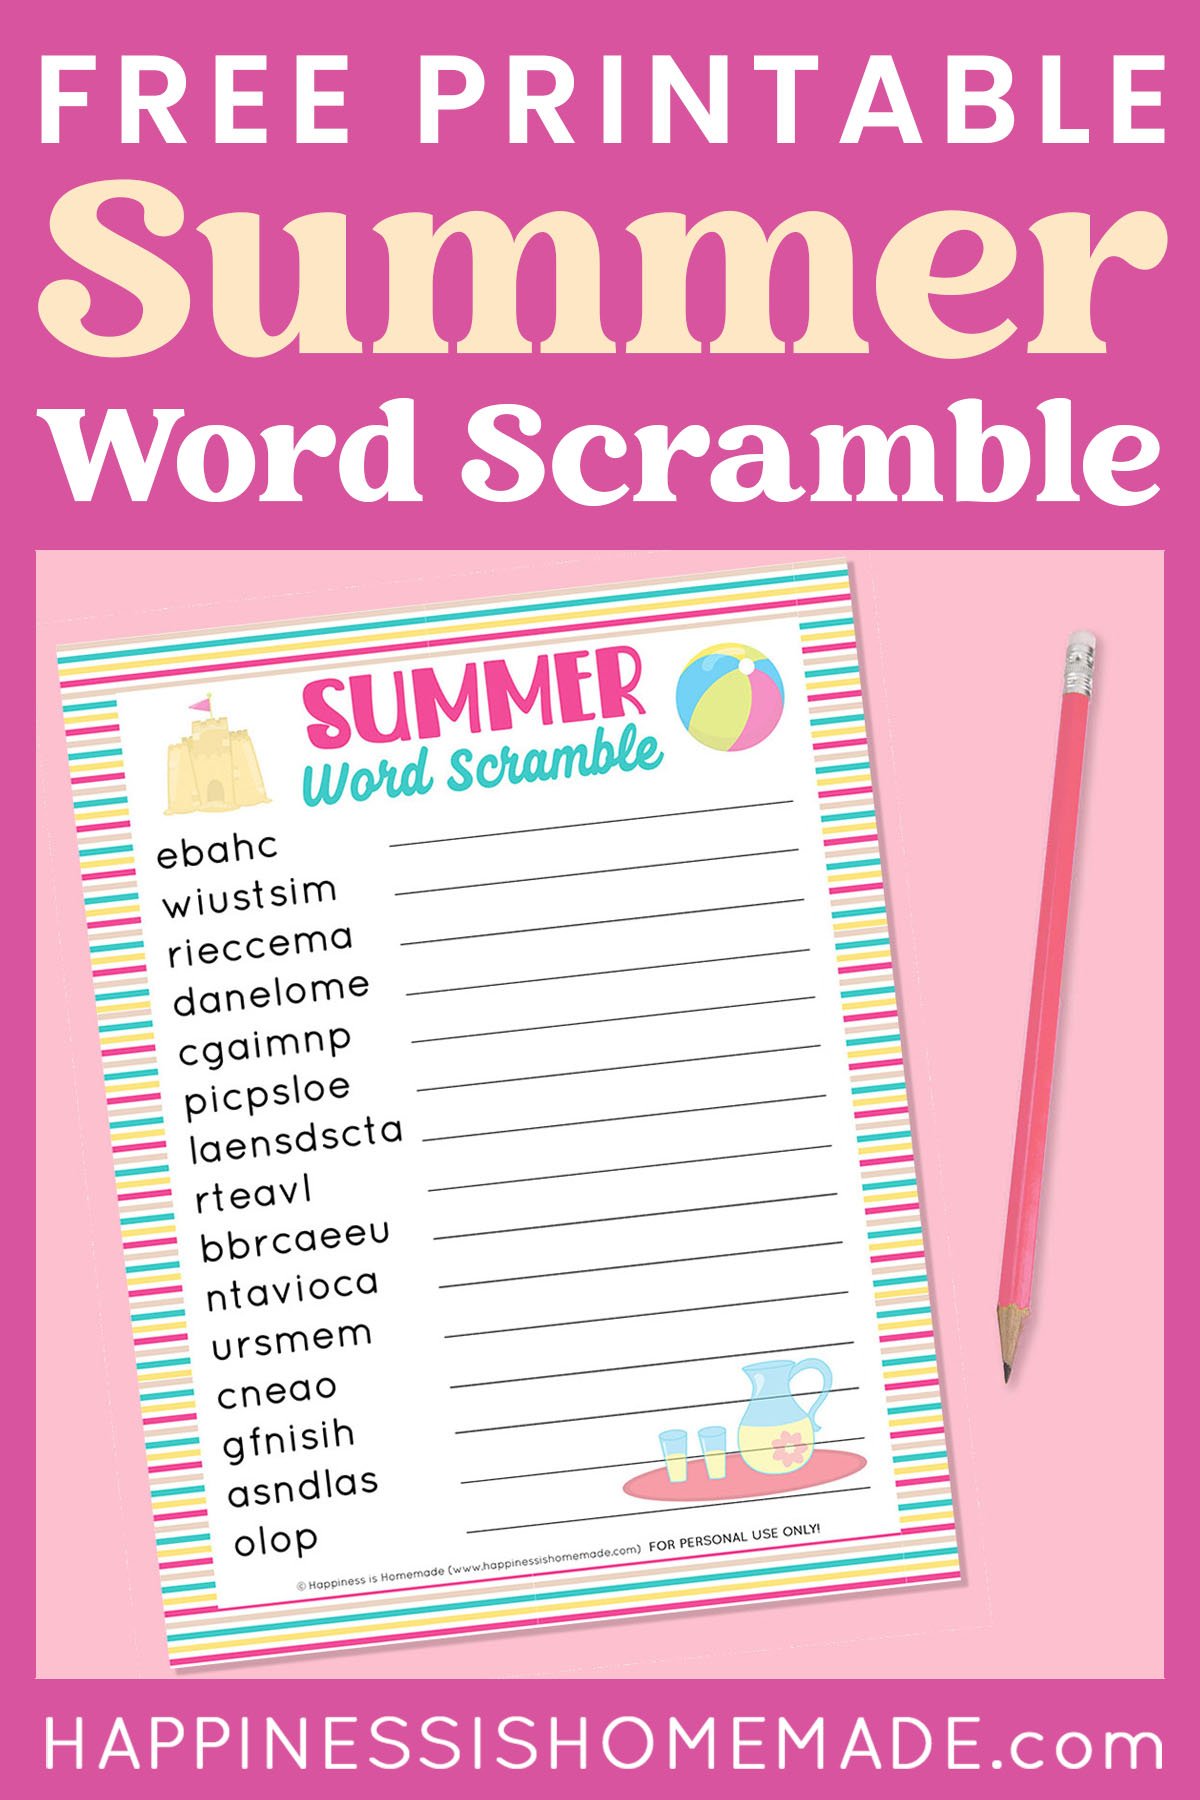 "Free Printable Summer Word Scramble" graphic with text on dark pink background and mockup of free printable game with pink pencil